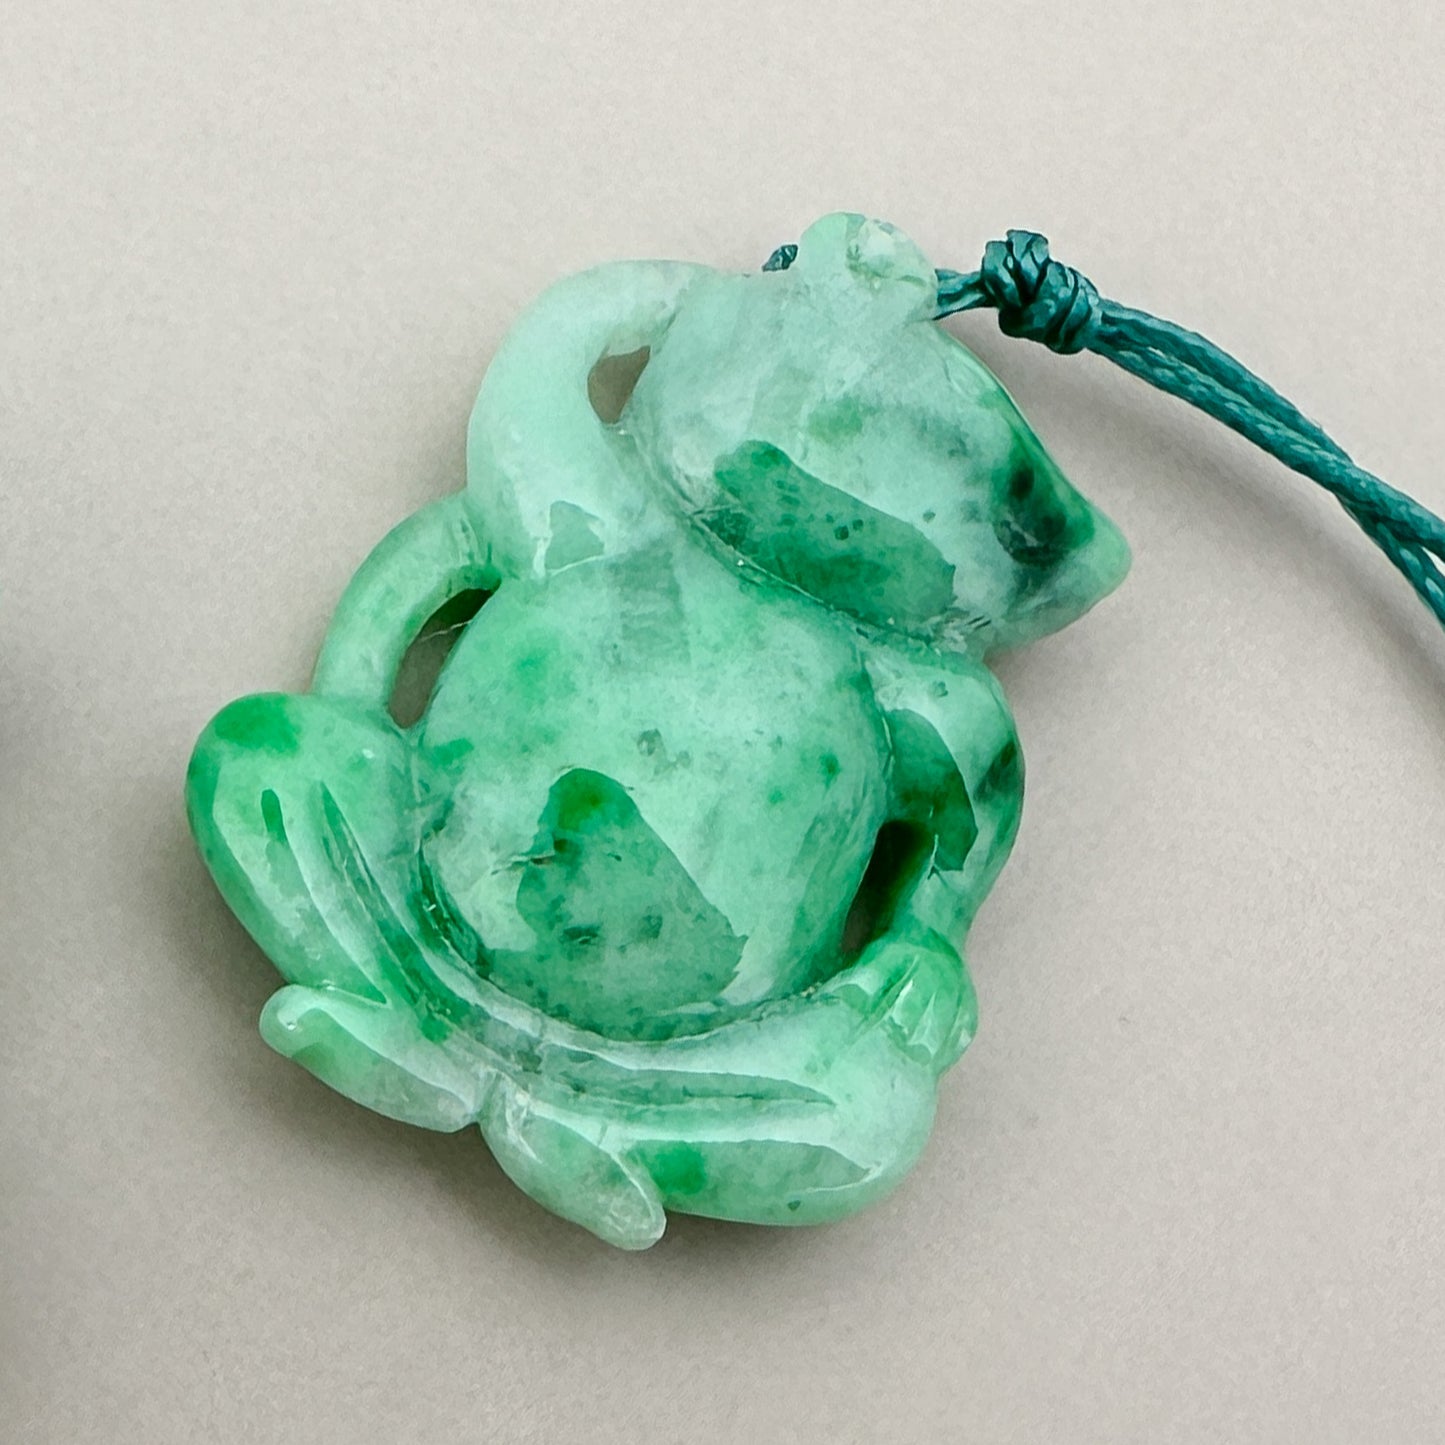 Green Jade Mouse/Rat 13x24mm Carved Pendant - 1 pc. (P2942)